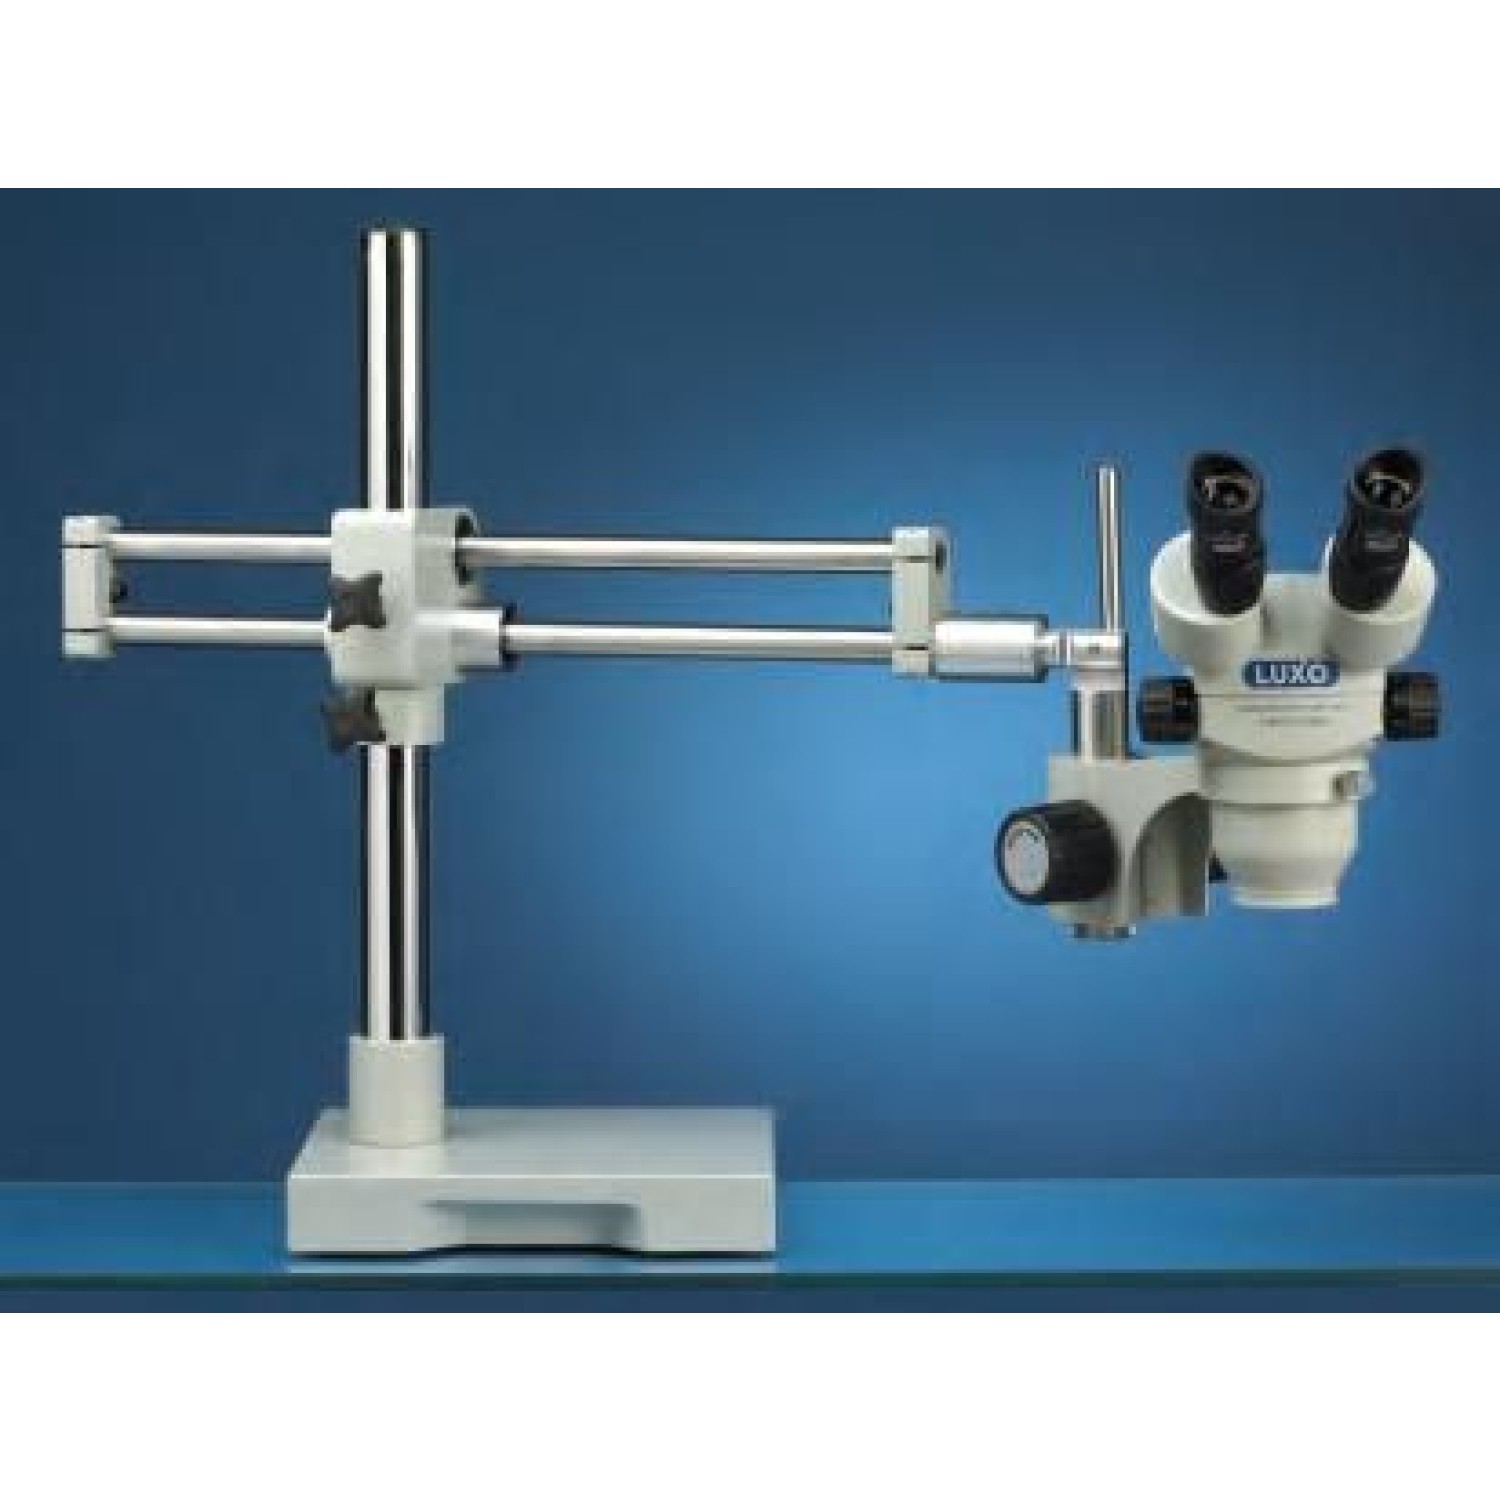 Luxo 23714RB Microscope System 273RB